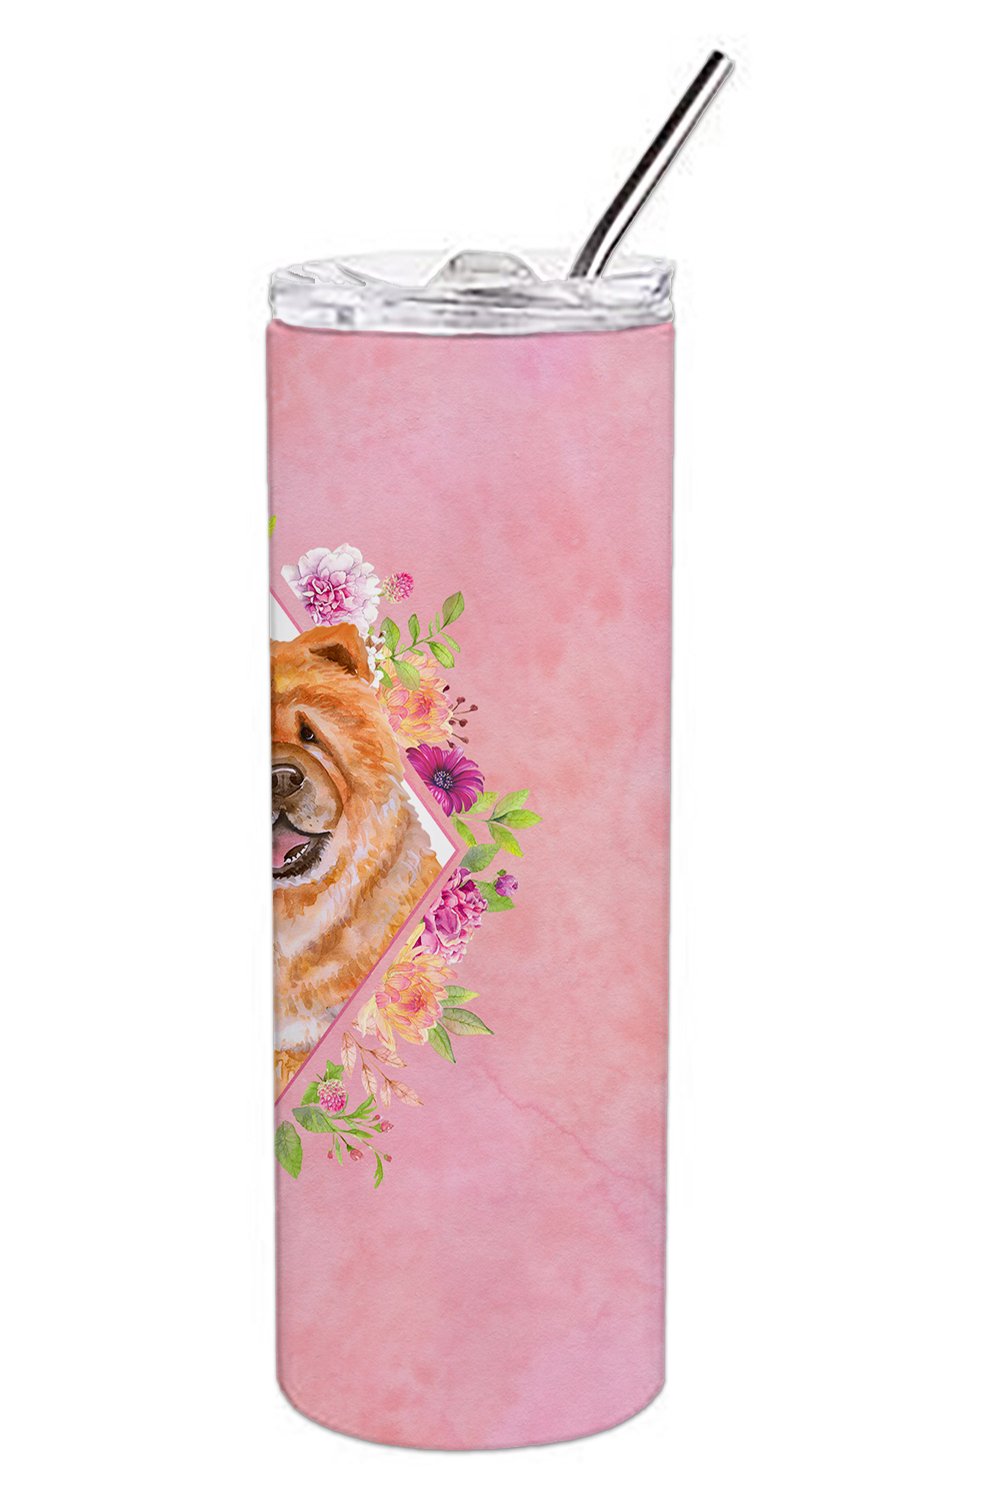 Chow Chow #1 Pink Flowers Double Walled Stainless Steel 20 oz Skinny Tumbler CK4131TBL20 by Caroline's Treasures